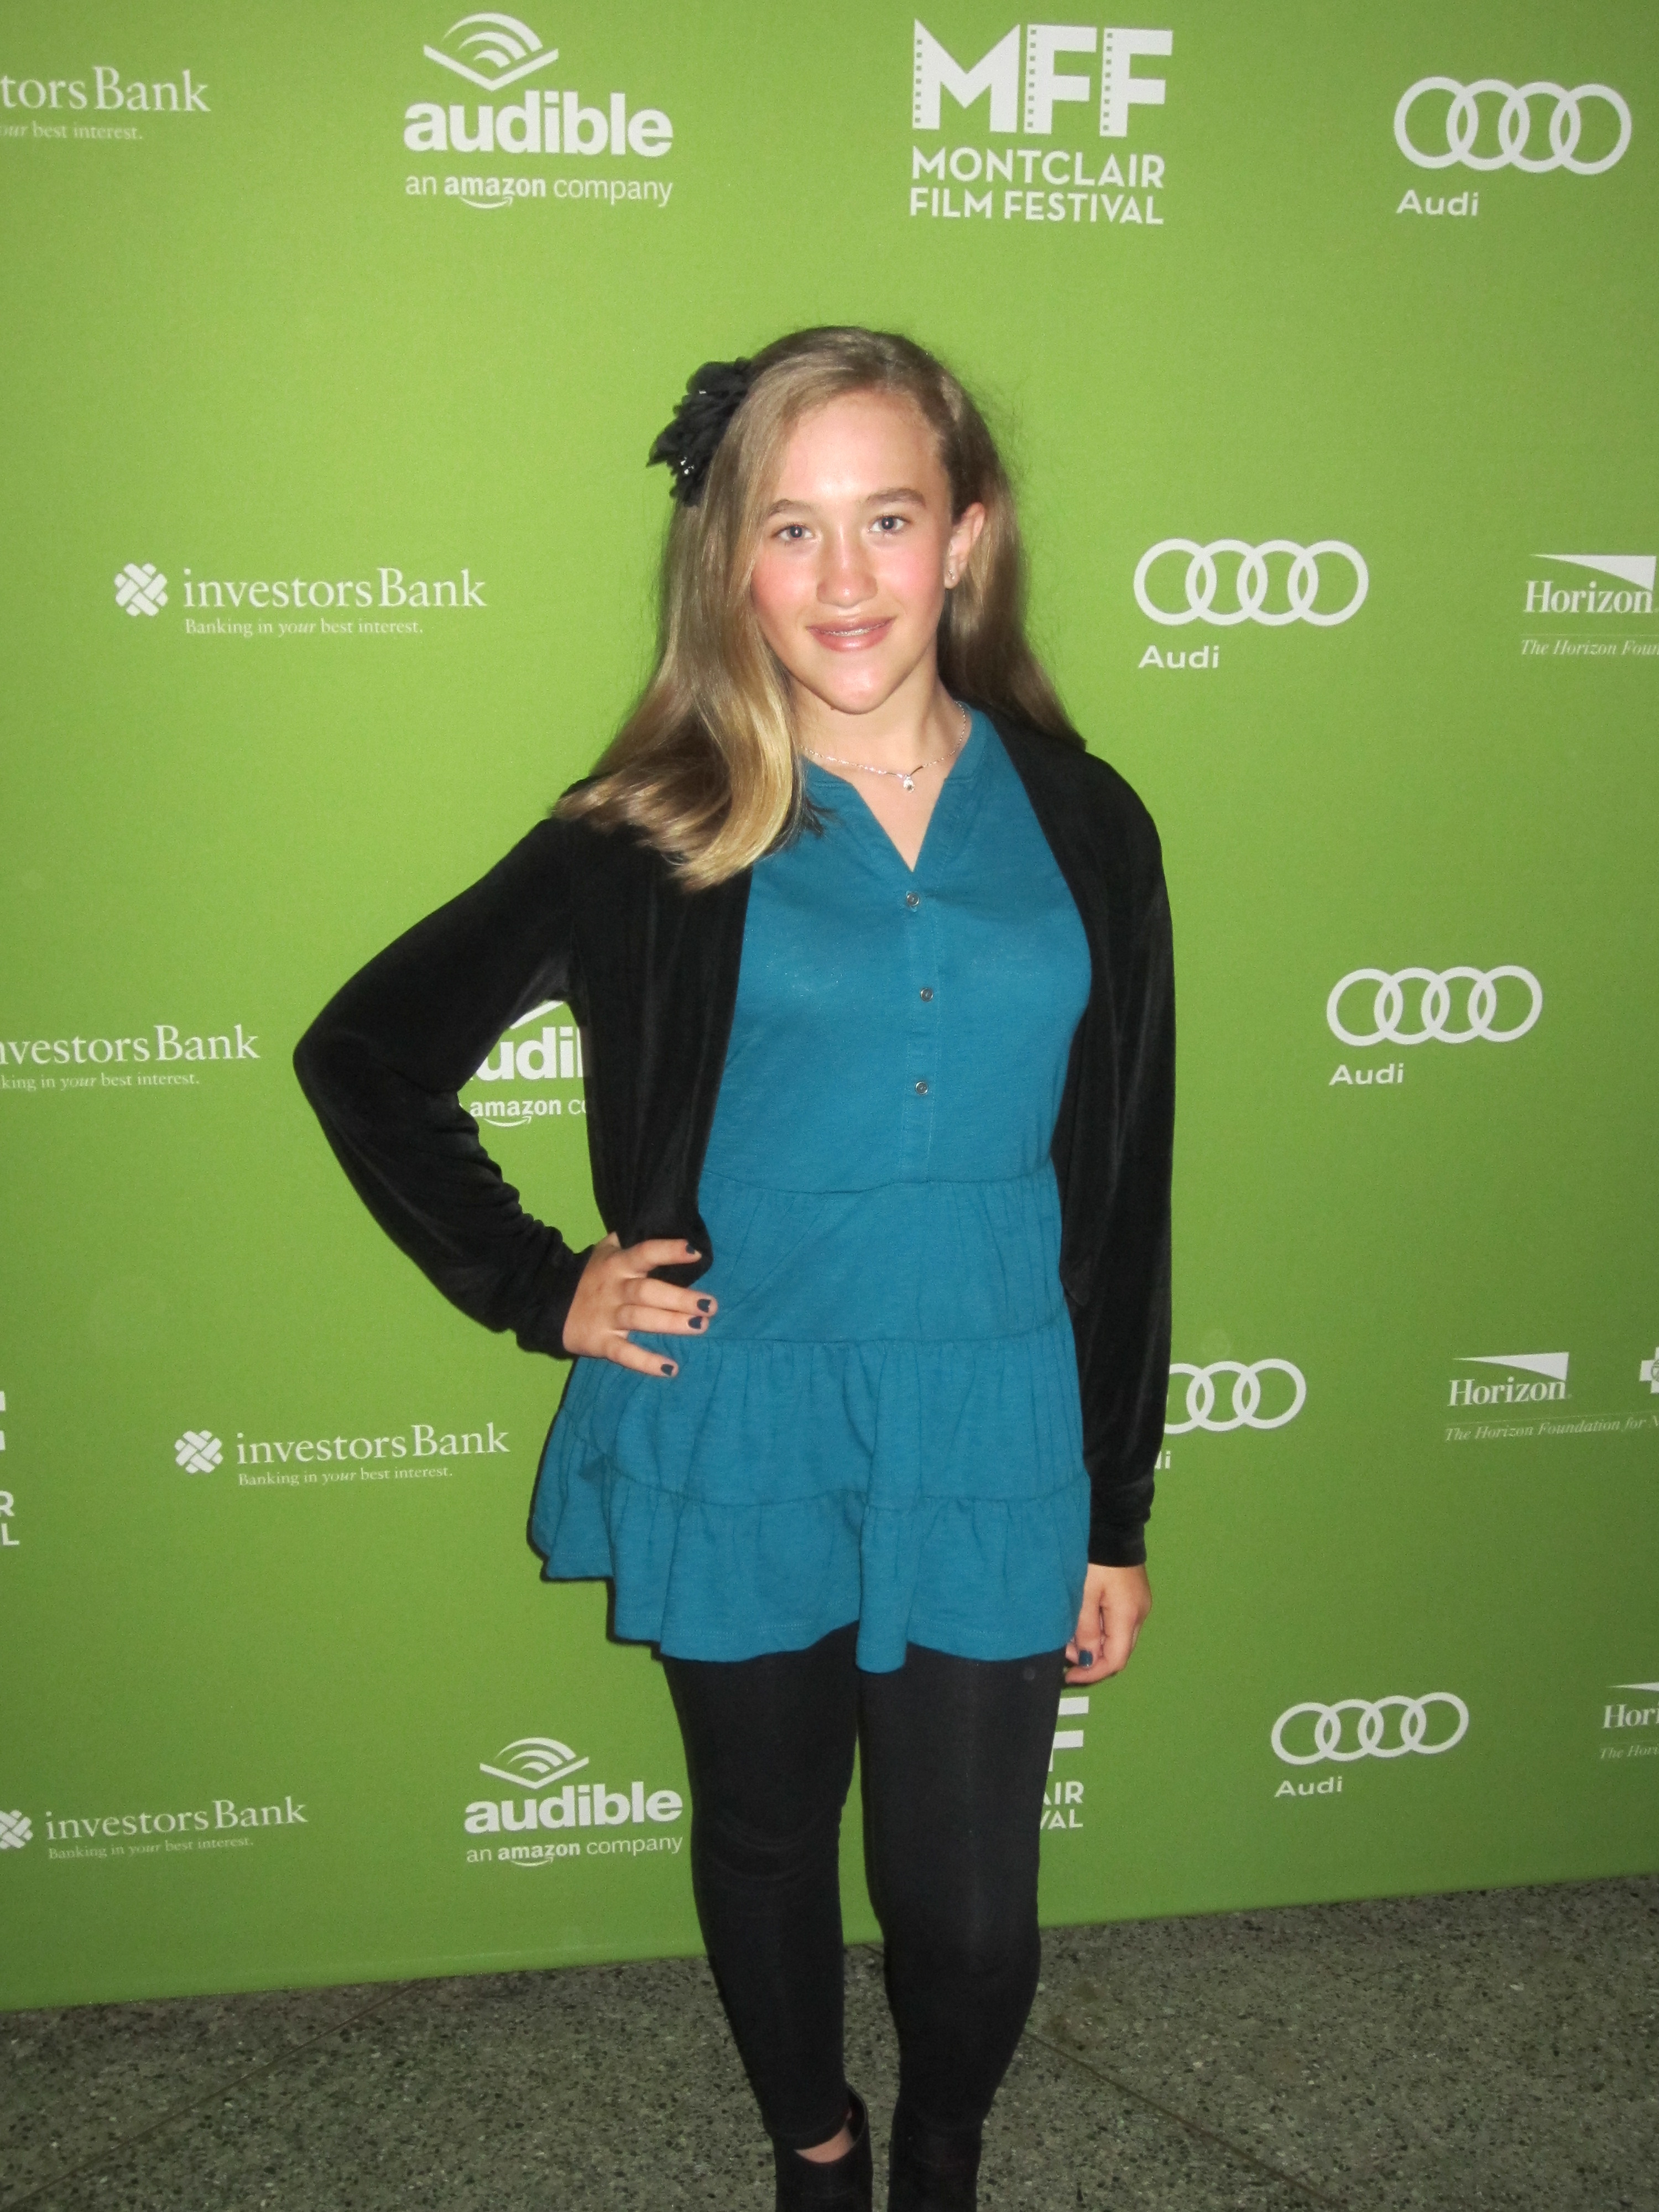 Allyson at 2014 Montclair Film Festival for premiere of her film 